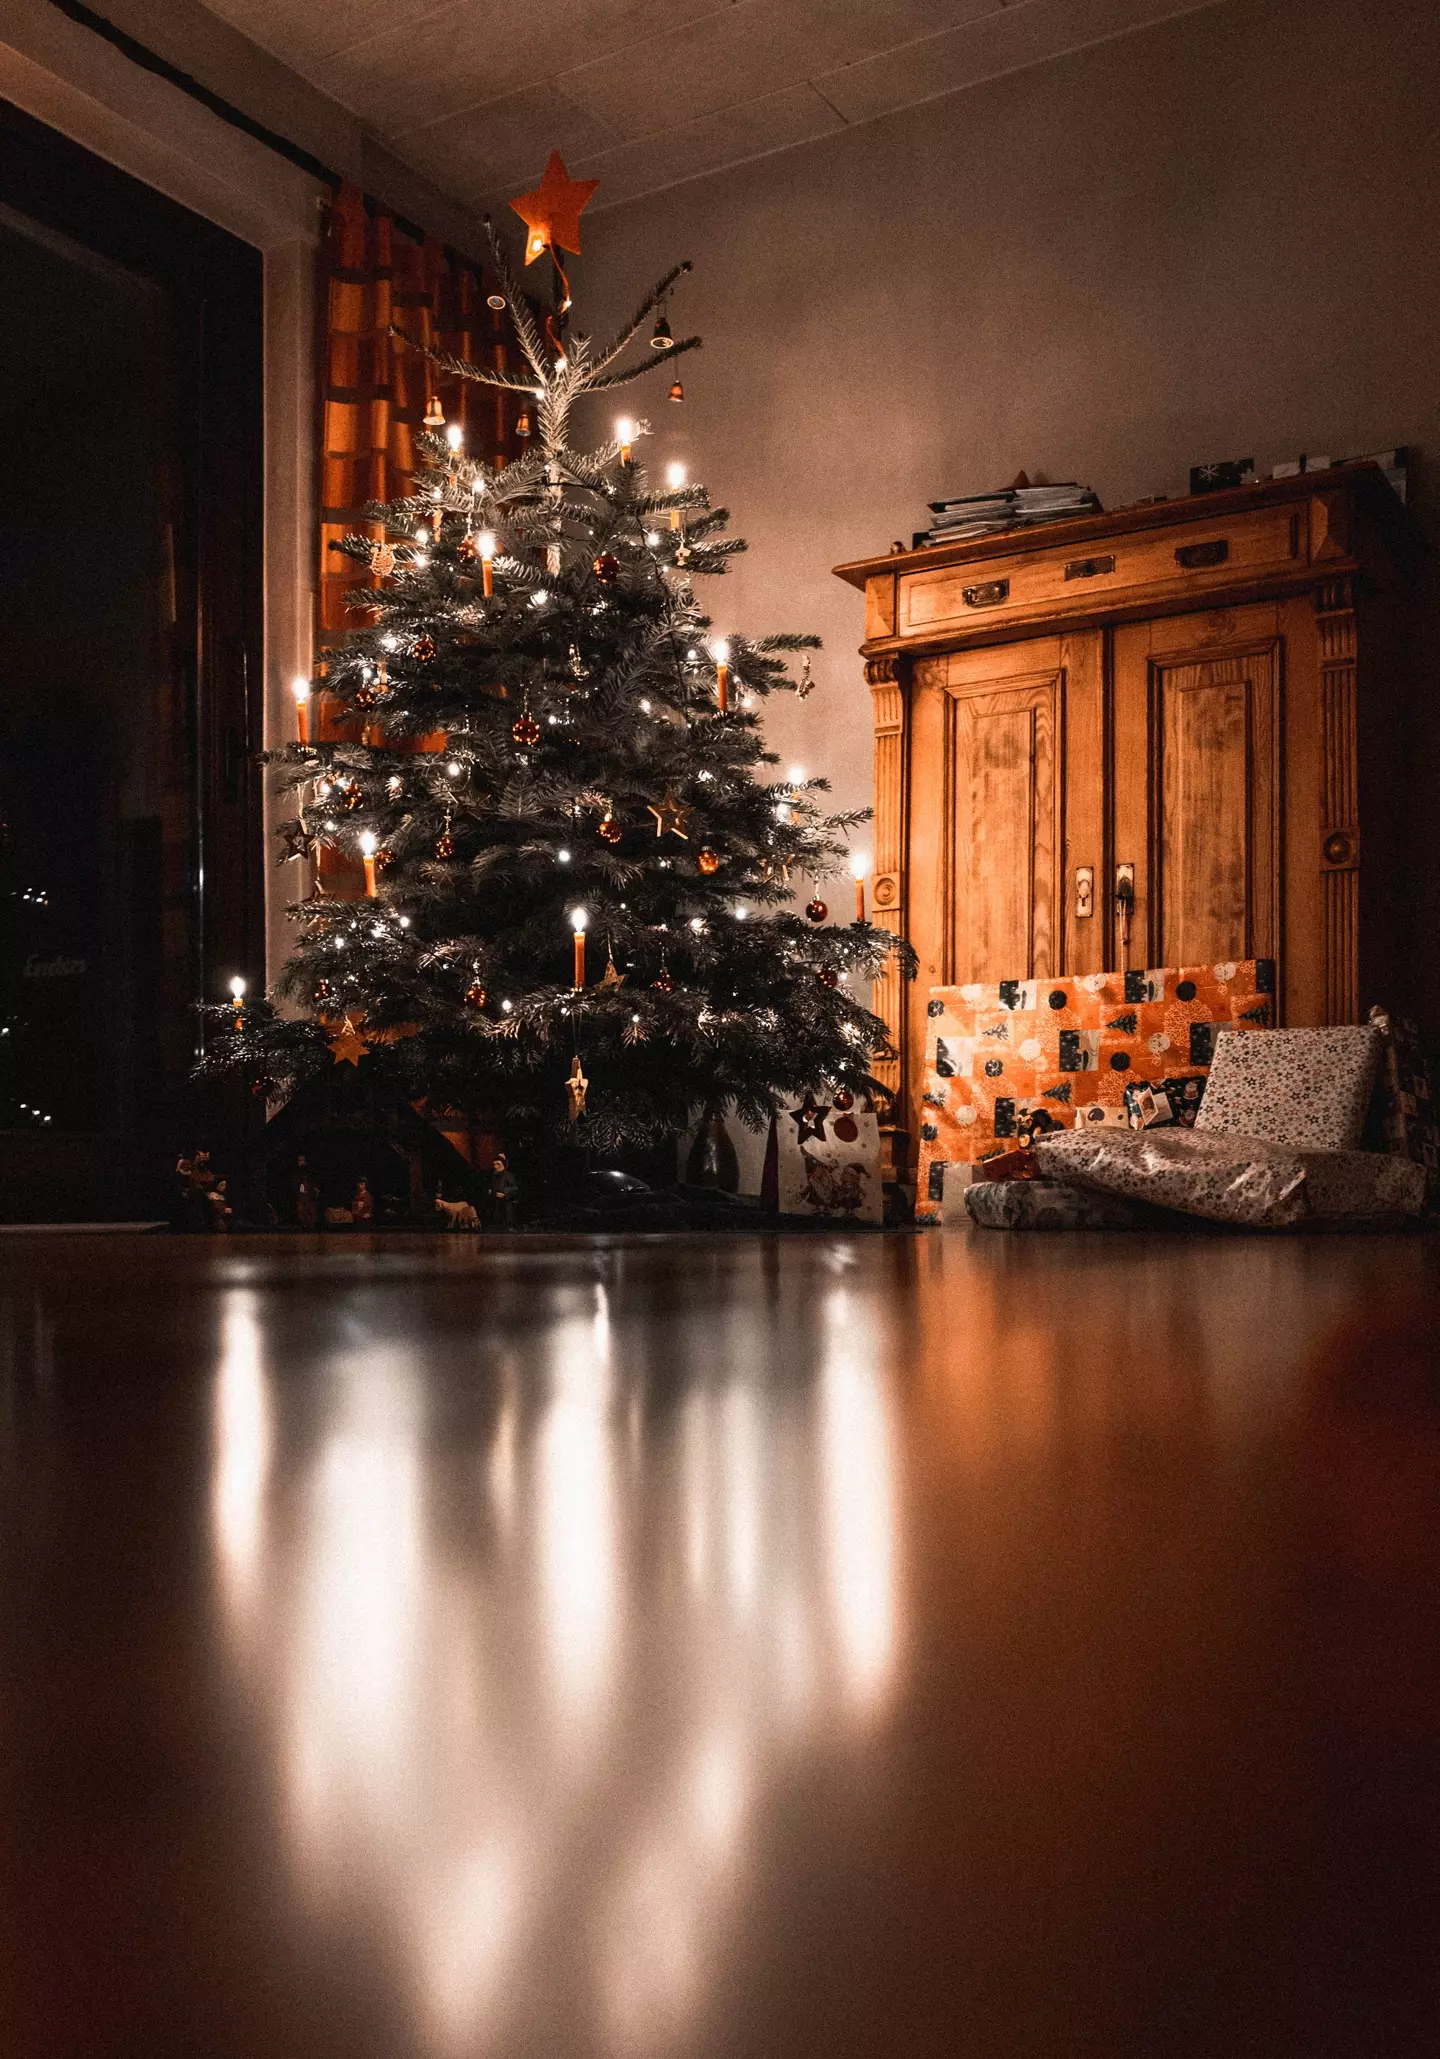 When do you take your Christmas tree down?